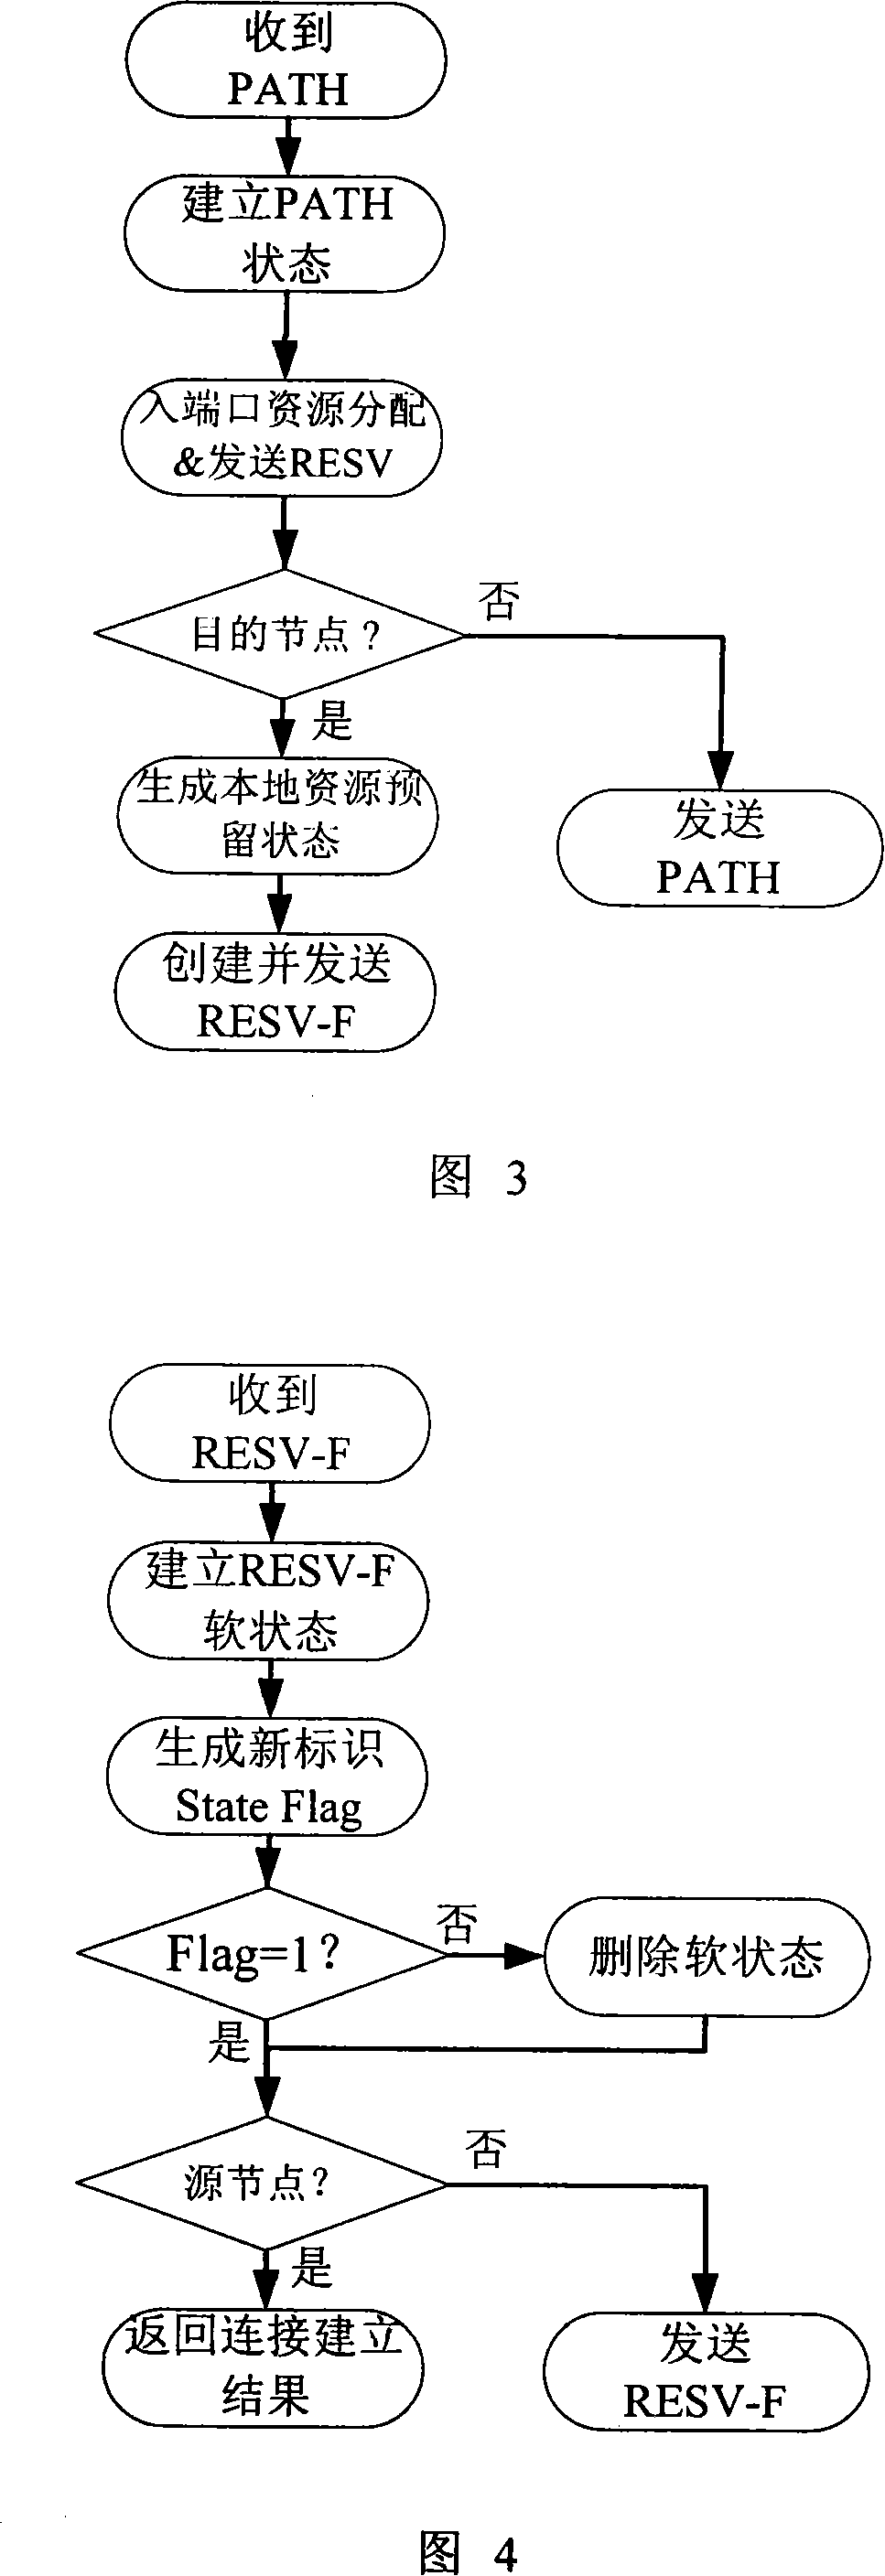 Parallel signaling method for realizing quick optical channel connection in intelligent optical network